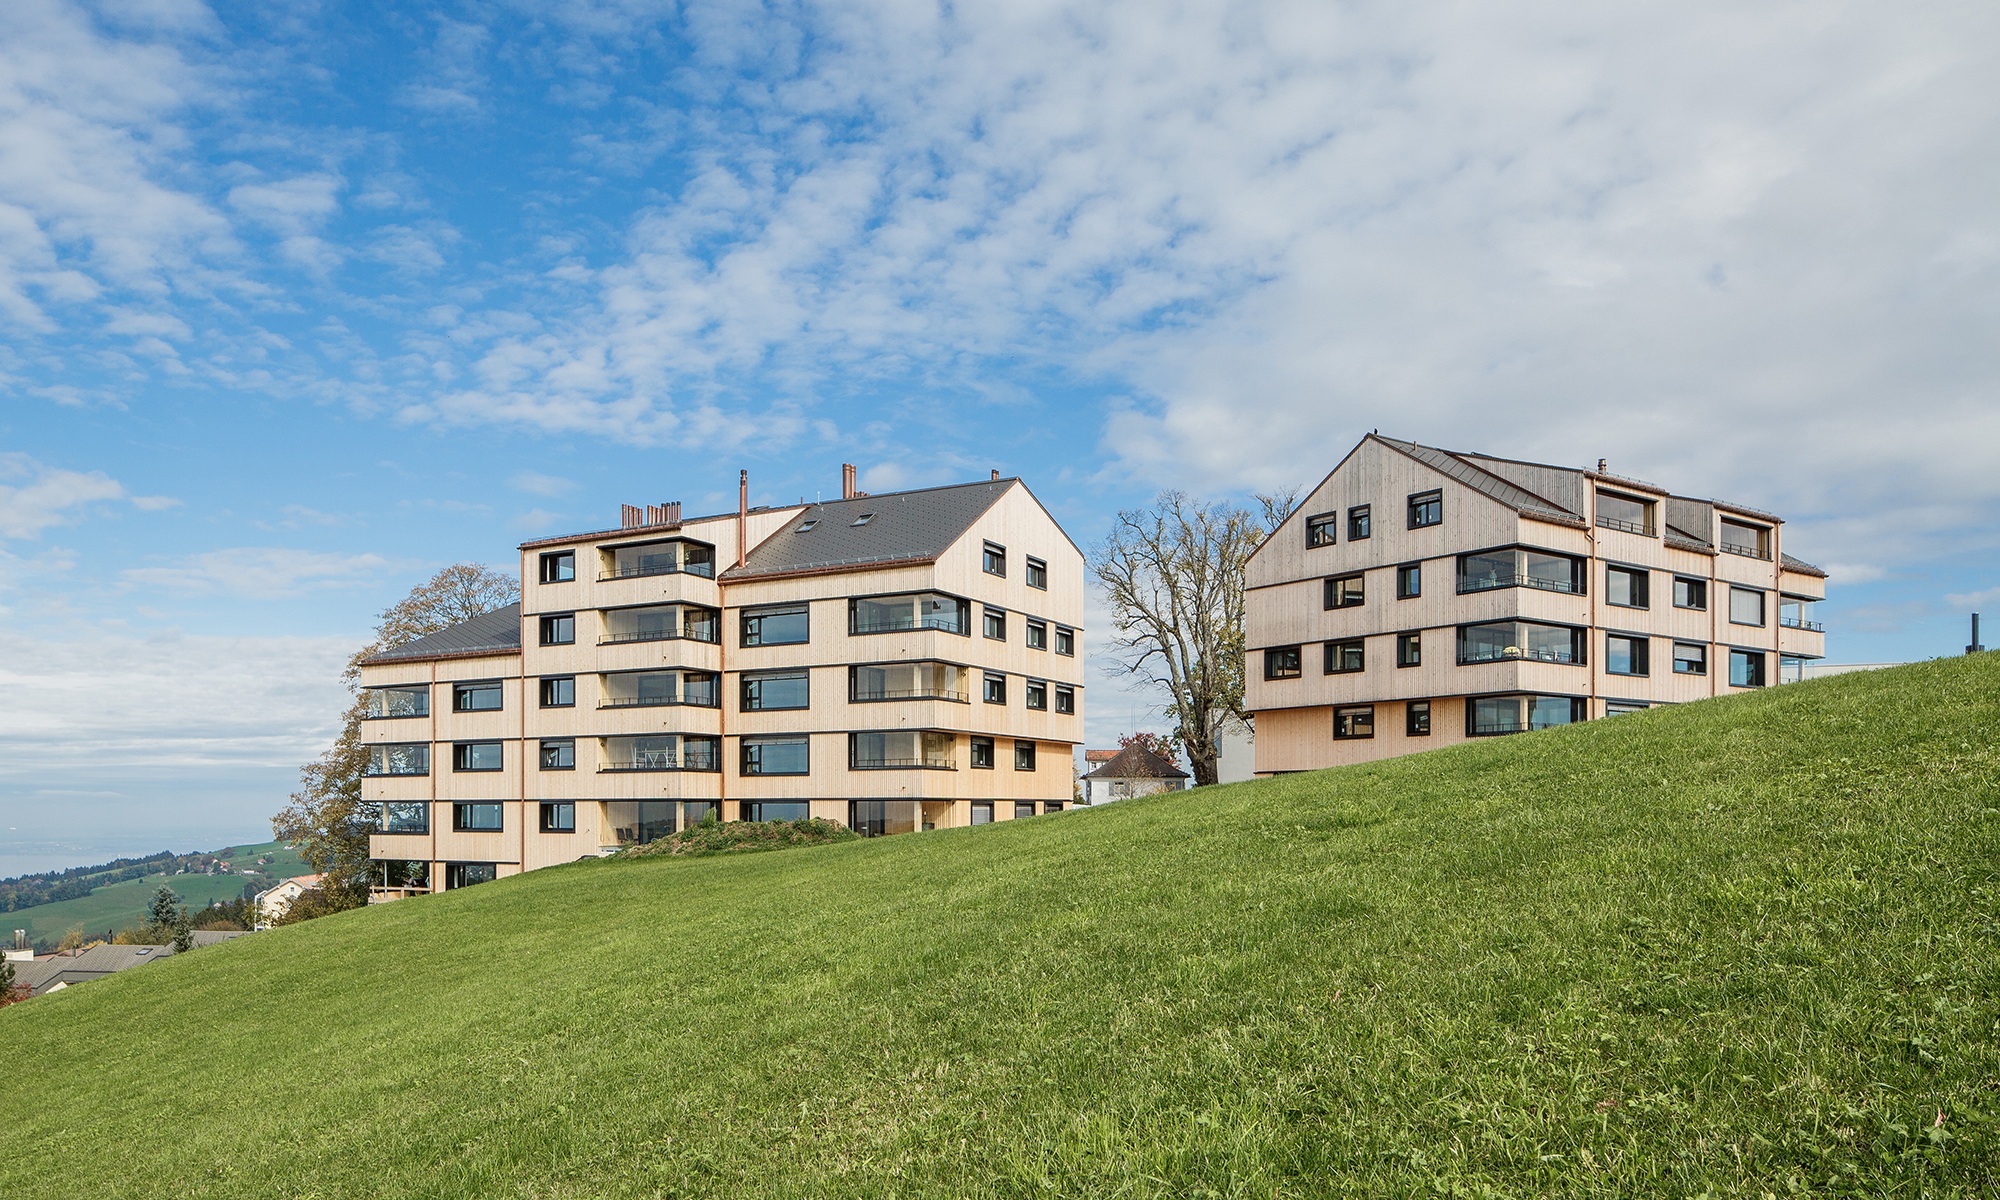 Two multi-storey timber residential buildings on a green meadow against a blue sky